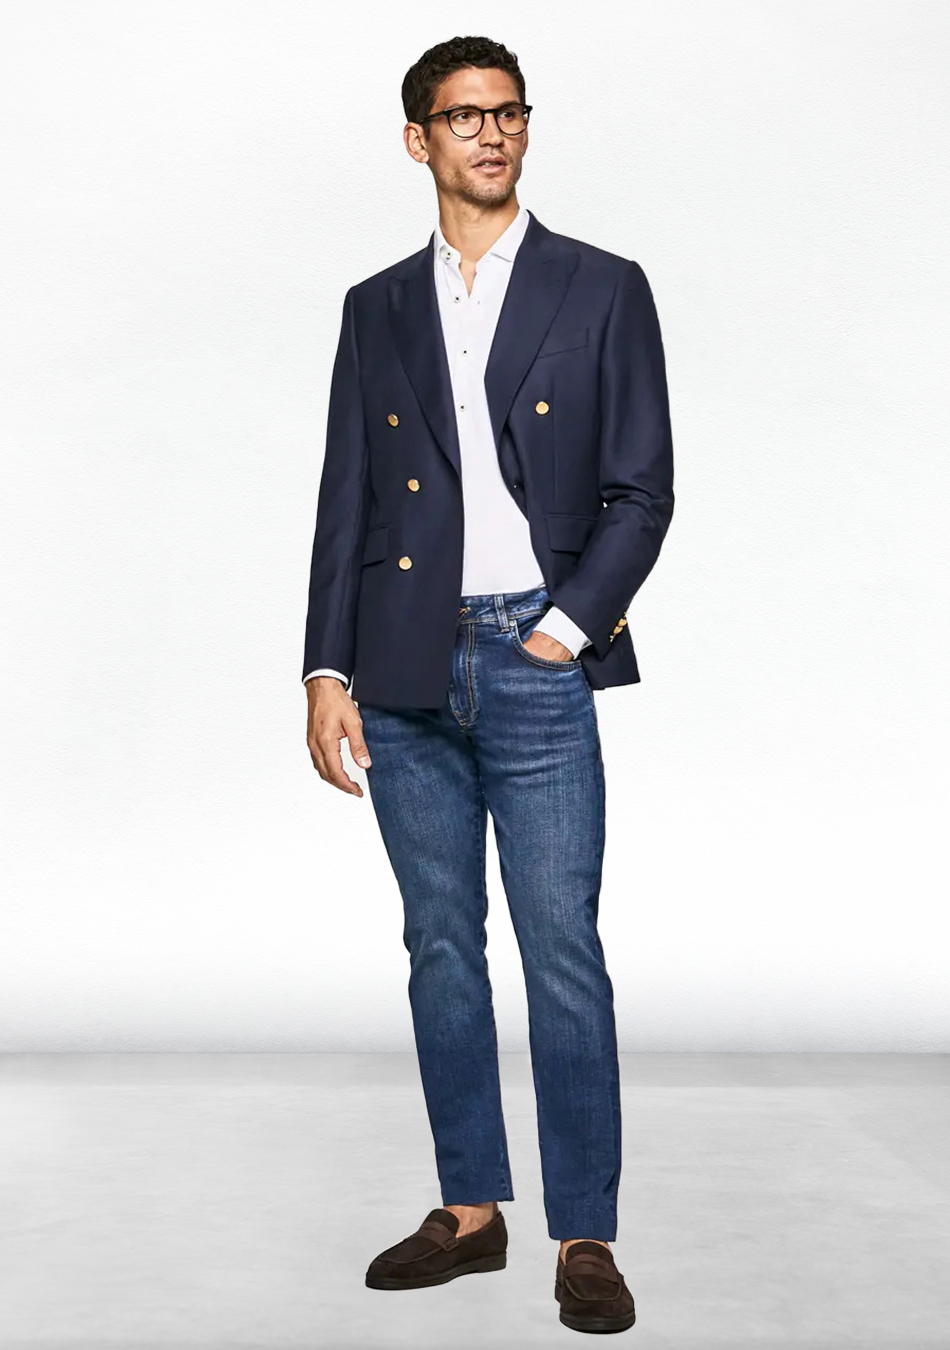 Navy double-breasted blazer, white shirt, blue jeans, and brown suede loafers